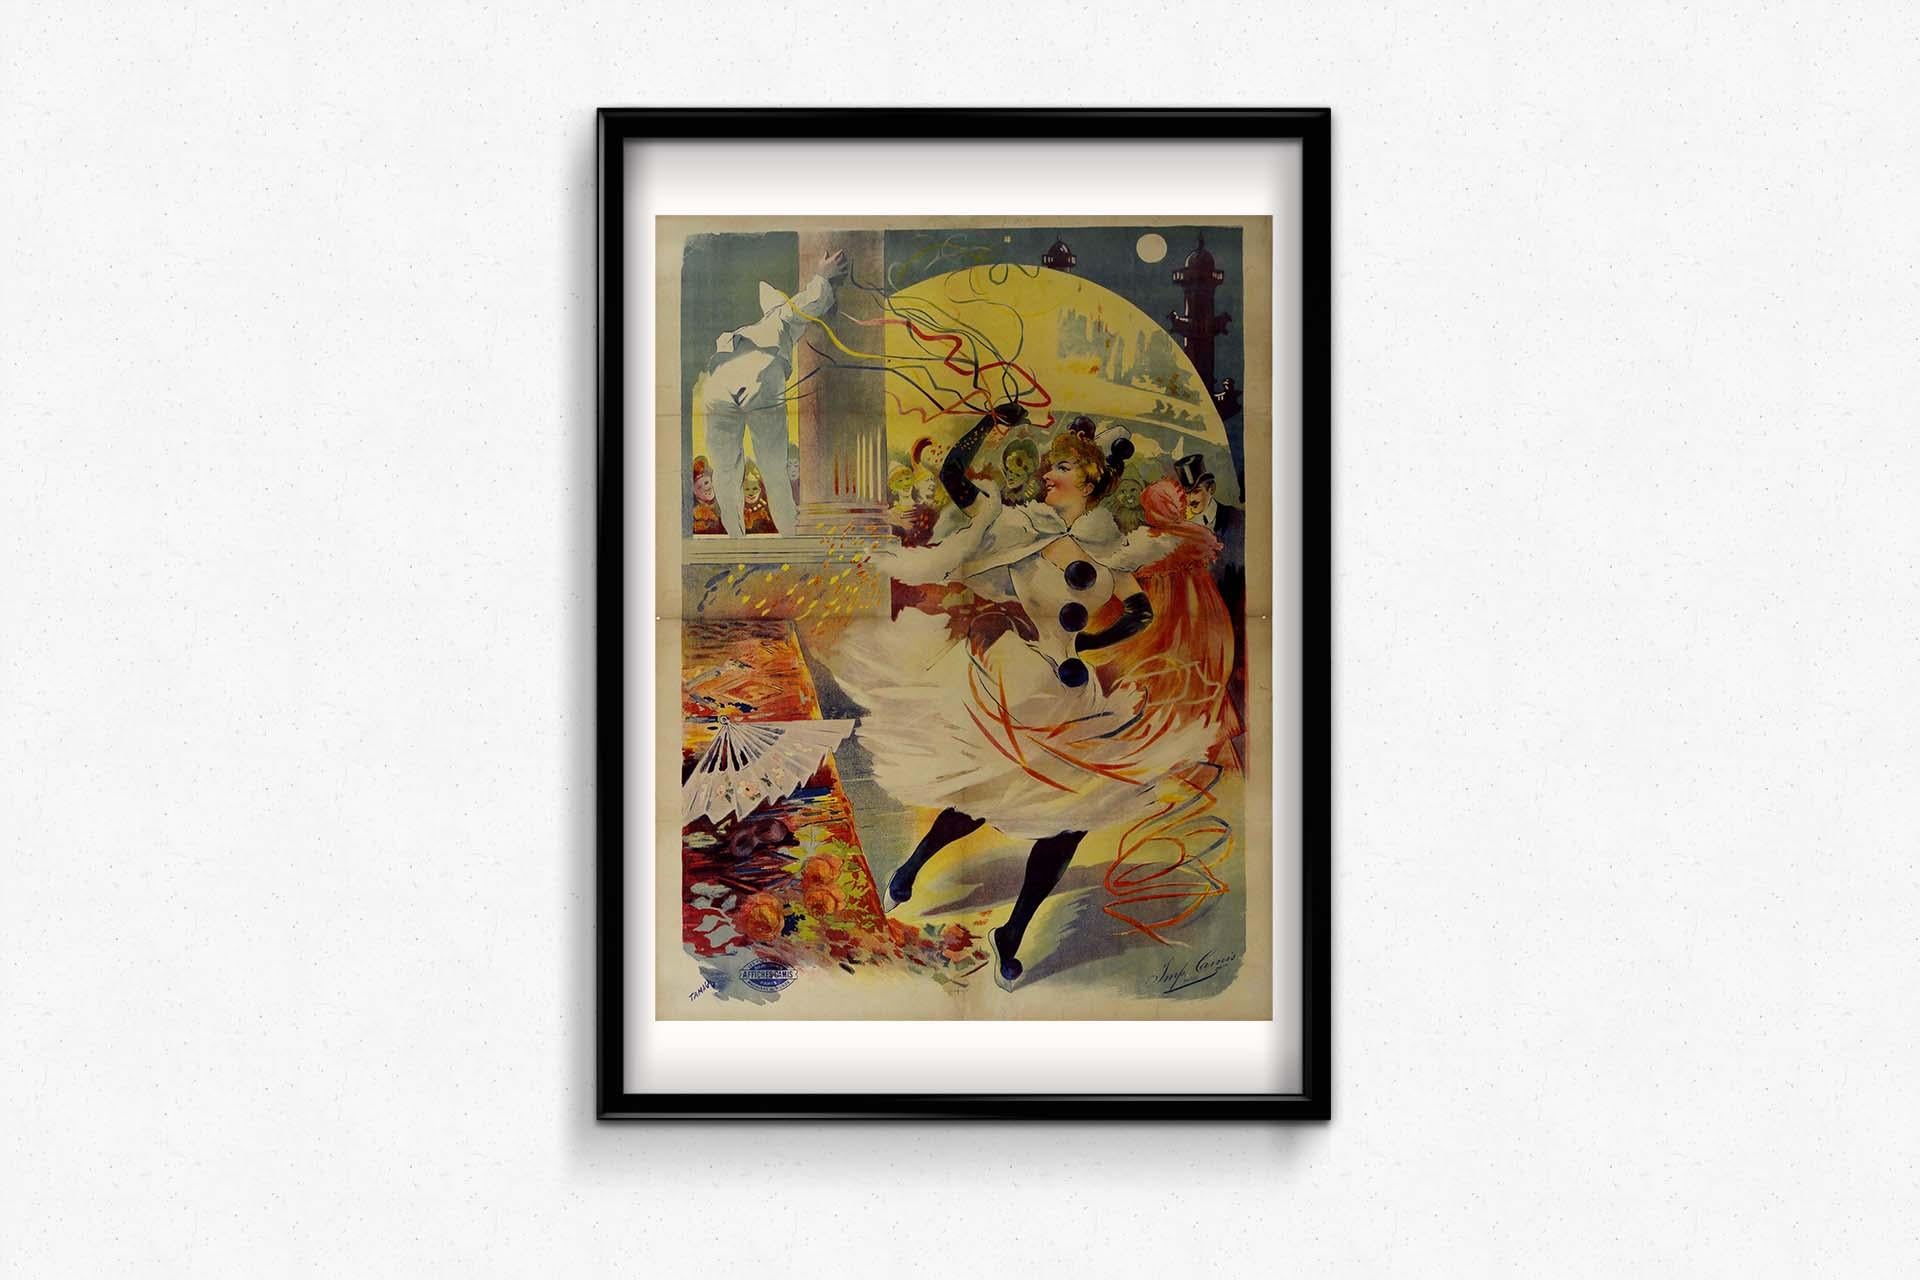 The circa 1900 poster for the Bal de l'Opéra de Paris, crafted by the talented artist Tamagno, offers a glimpse into the cultural richness of the Belle Époque. Tamagno, recognized for his artistic finesse, captured the spirit of the era in an